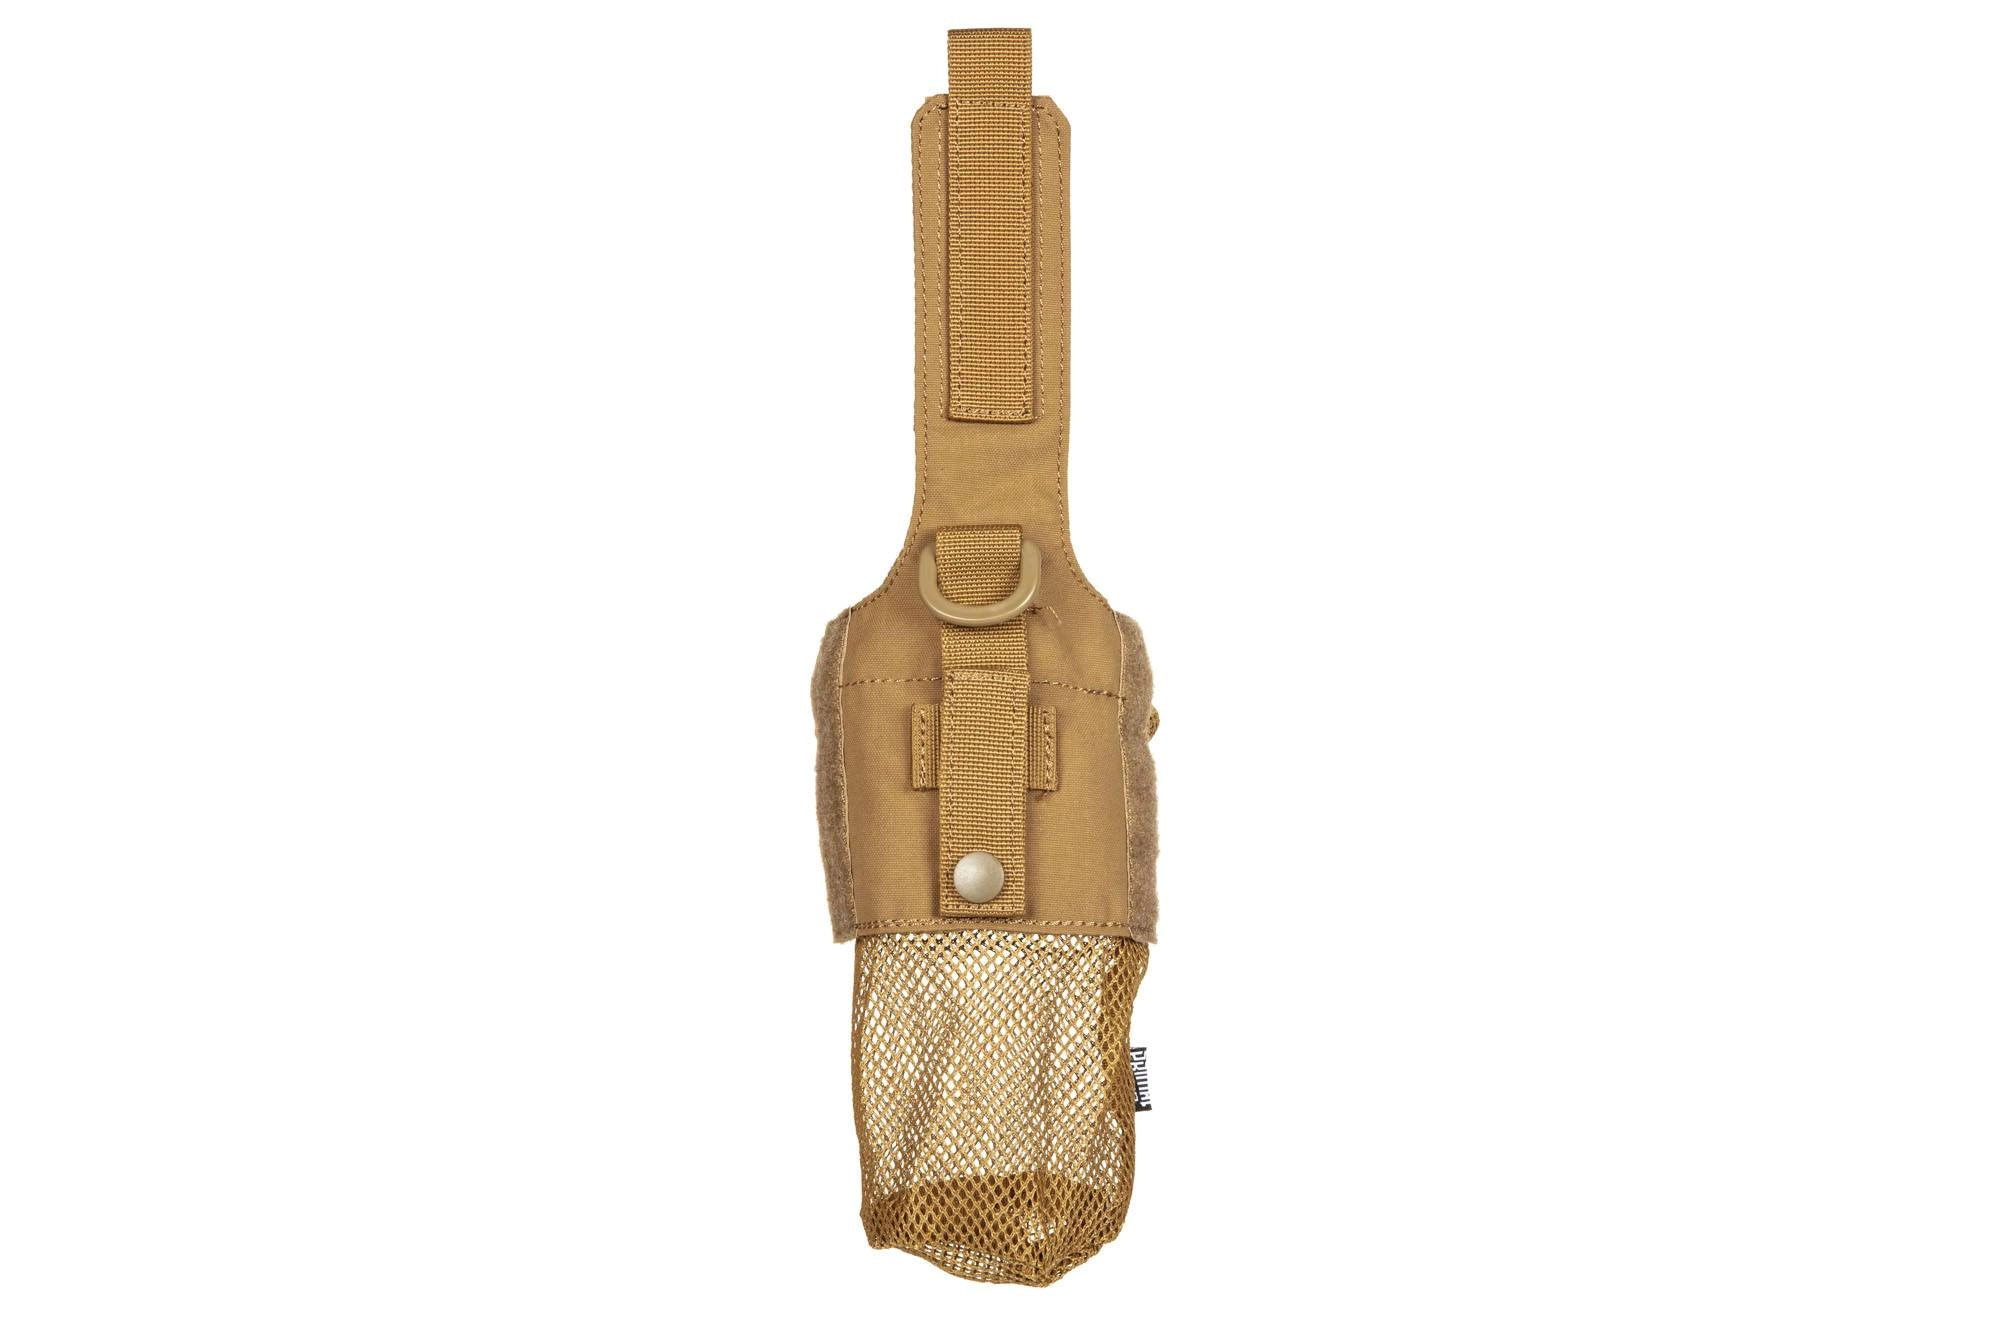 Folding Hydro Pouch - Coyote Brown